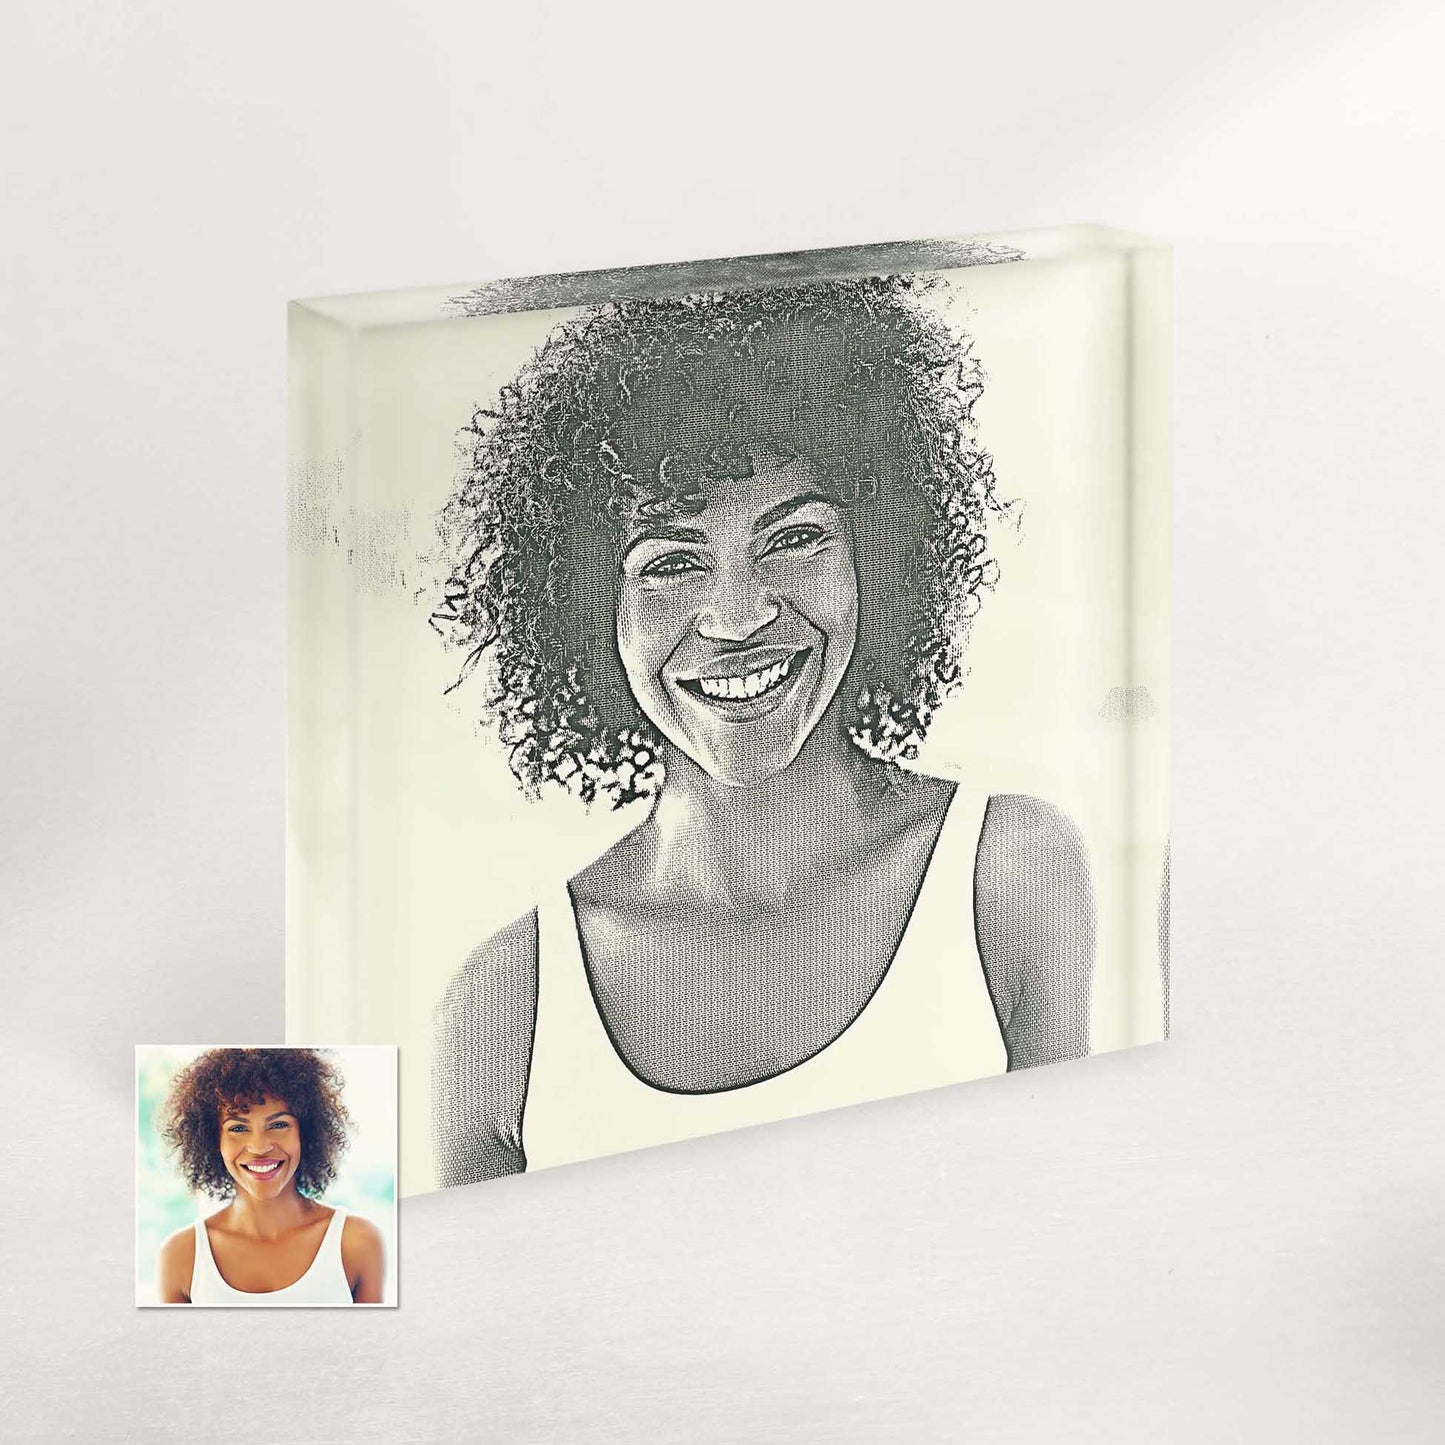 Capture your memories in a unique way with our personalised Money Engraved Acrylic Block Photo. Customised from your photo, it showcases a stunning engraving of money, making it a one-of-a-kind gift that will be treasured forever.